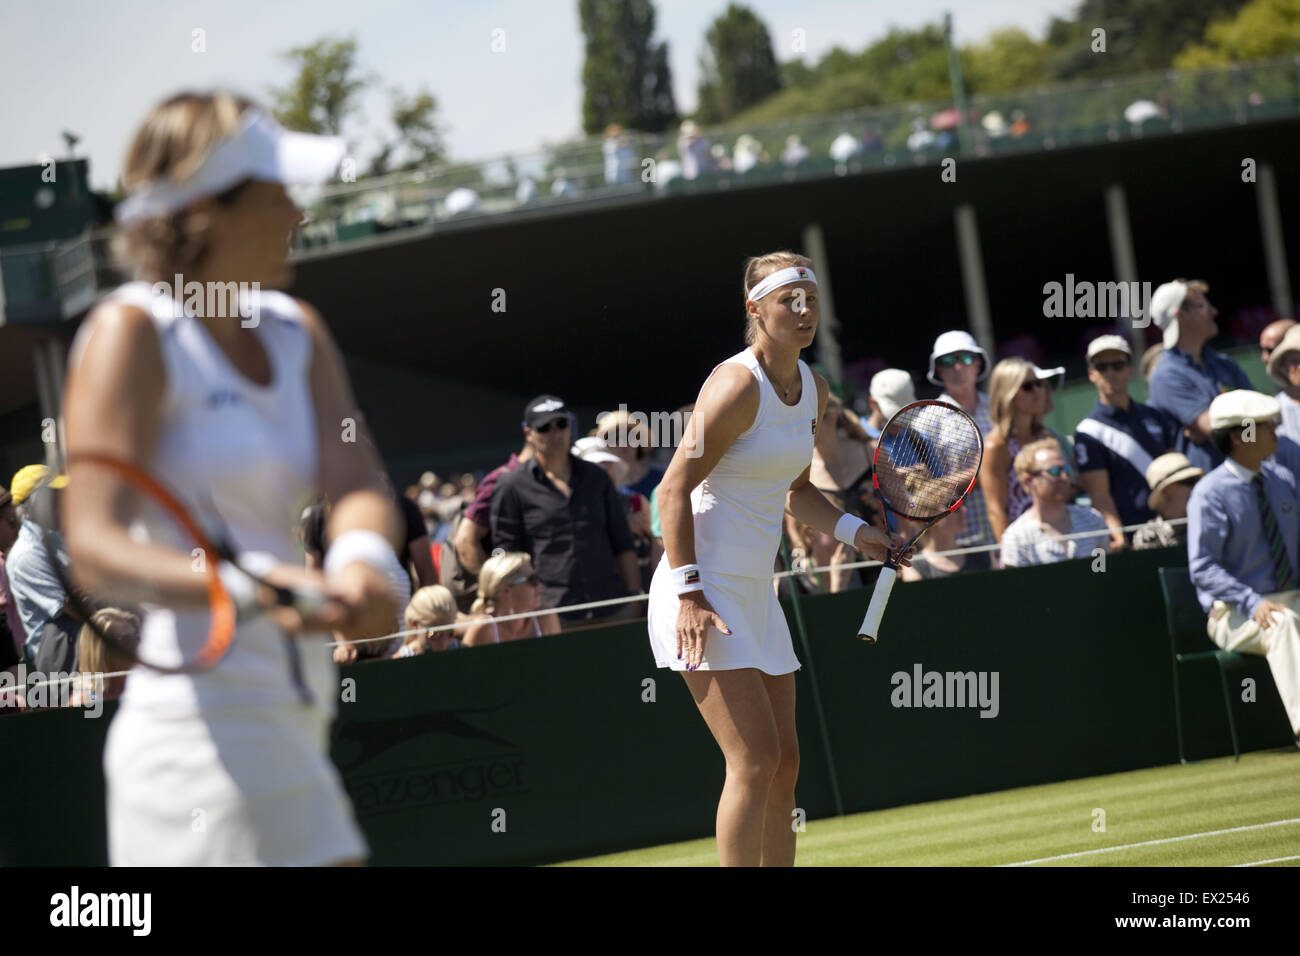 London, UK. 3rd July, 2015. V.Dushevina (RUS) and M.Martinez Sanchez (ESP) playing against.M.Krajicek (NED) with B.Strycova (CZE) . at Ladies' doubles at the Wimbledon .The Championships, Wimbledon or simply Wimbledon, is the oldest tennis tournament in the world, and is widely considered the most prestigious. It has been held at the All England Club in Wimbledon, London since 1877, London, UK. © Veronika Lukasova/ZUMA Wire/Alamy Live News Stock Photo